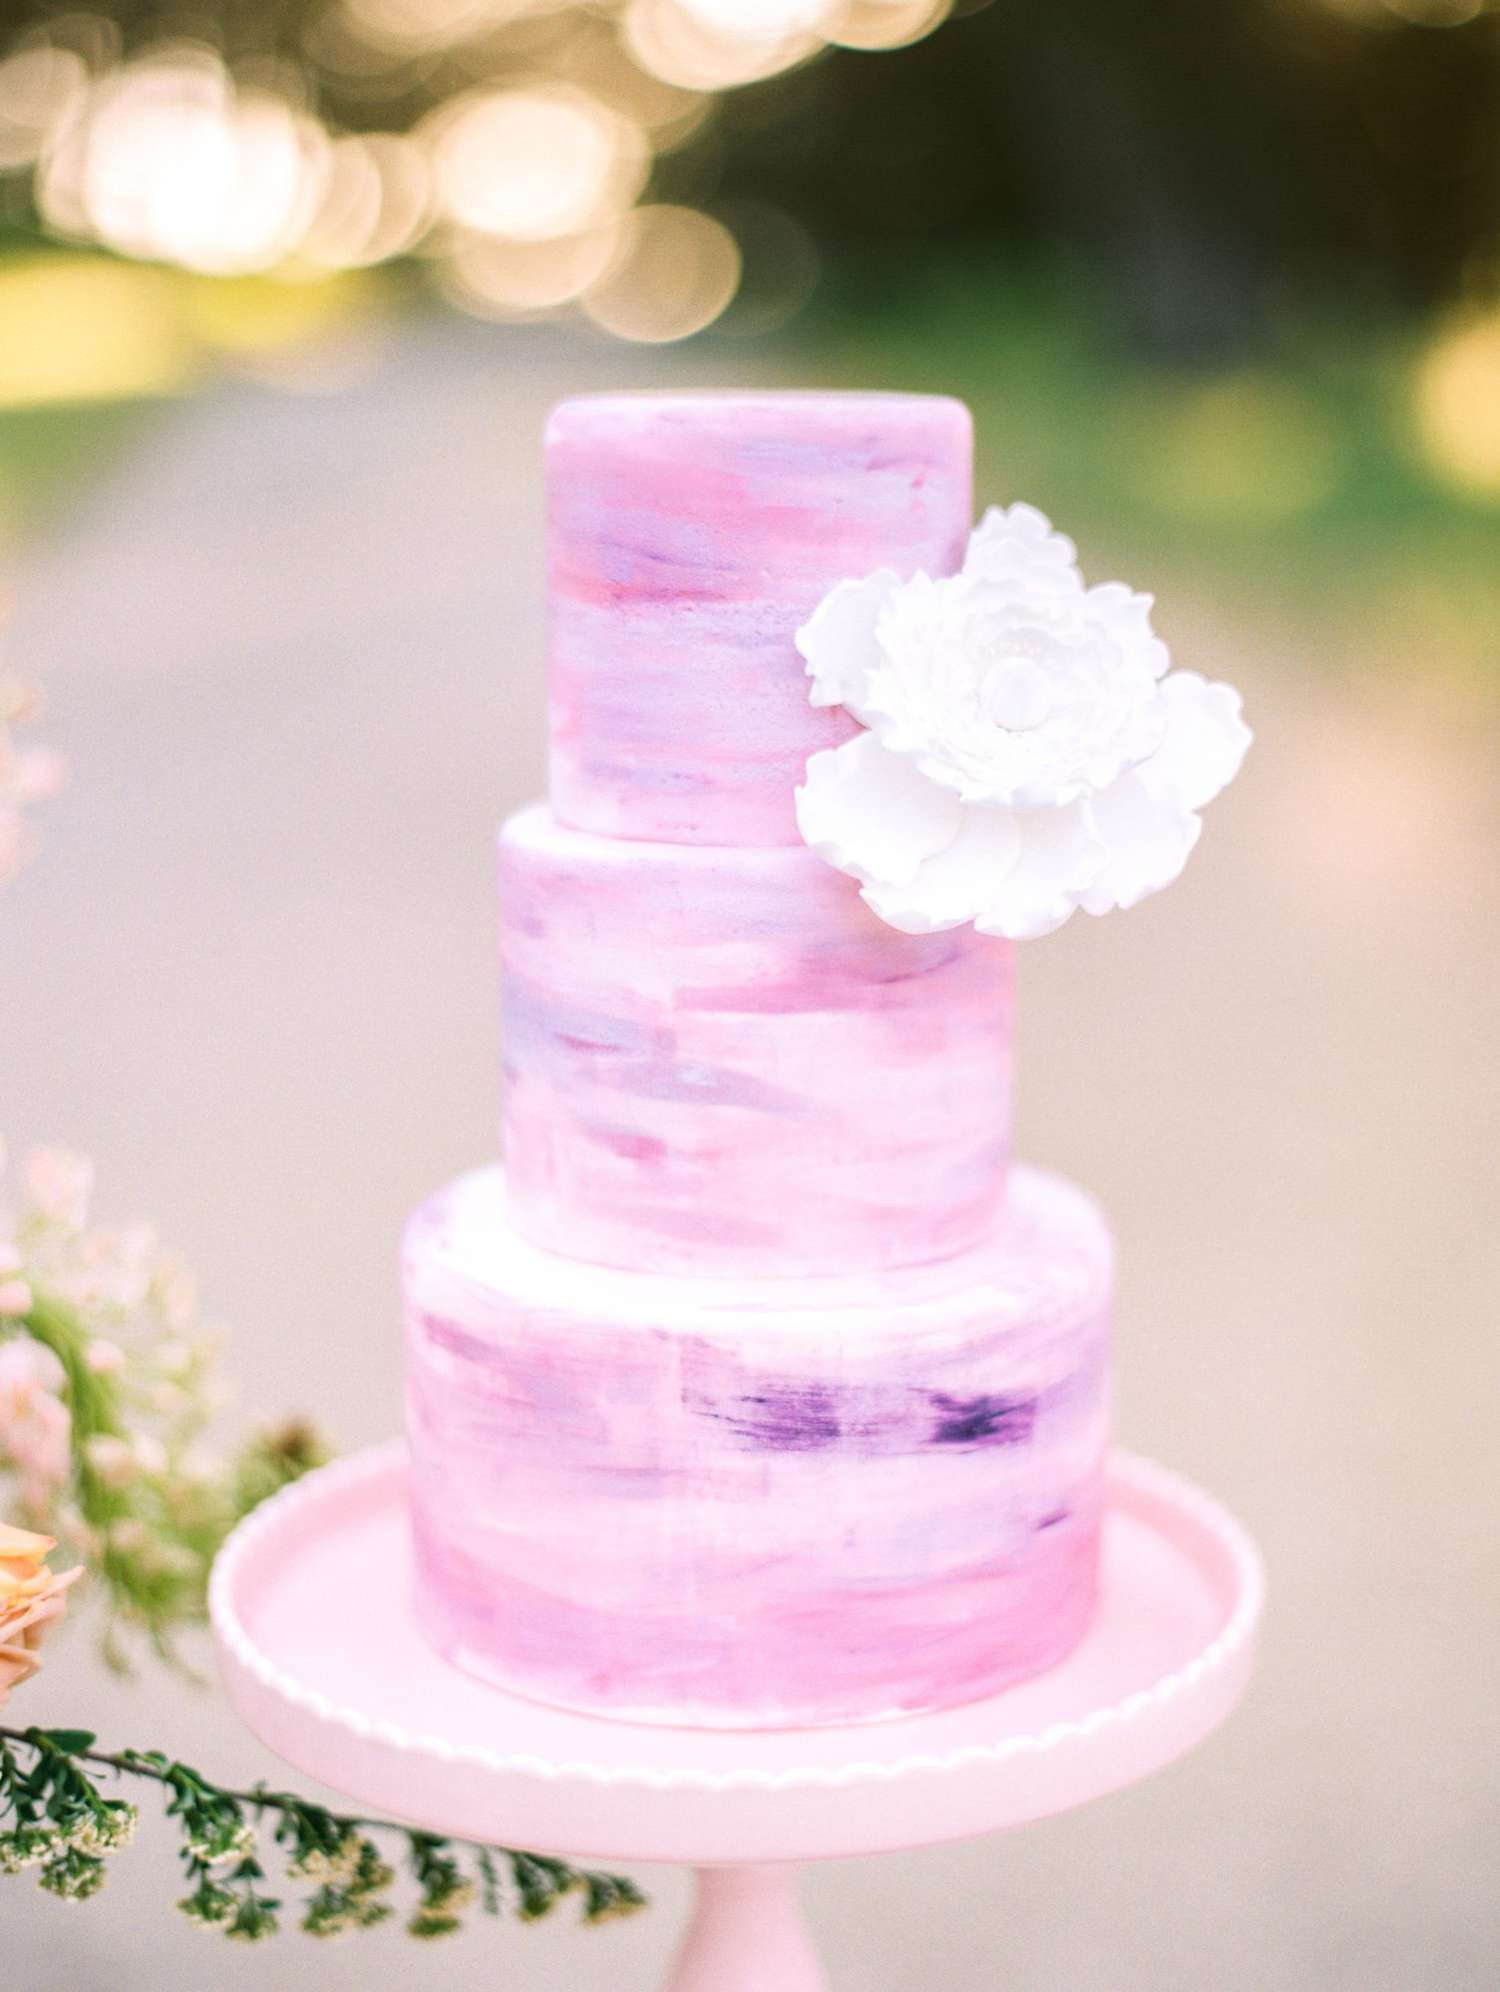 <p>A simple white sugar flower was the perfect addition to this otherwise-bold brushed cake by Ma Petite Maison Cake Design.</p>
                            